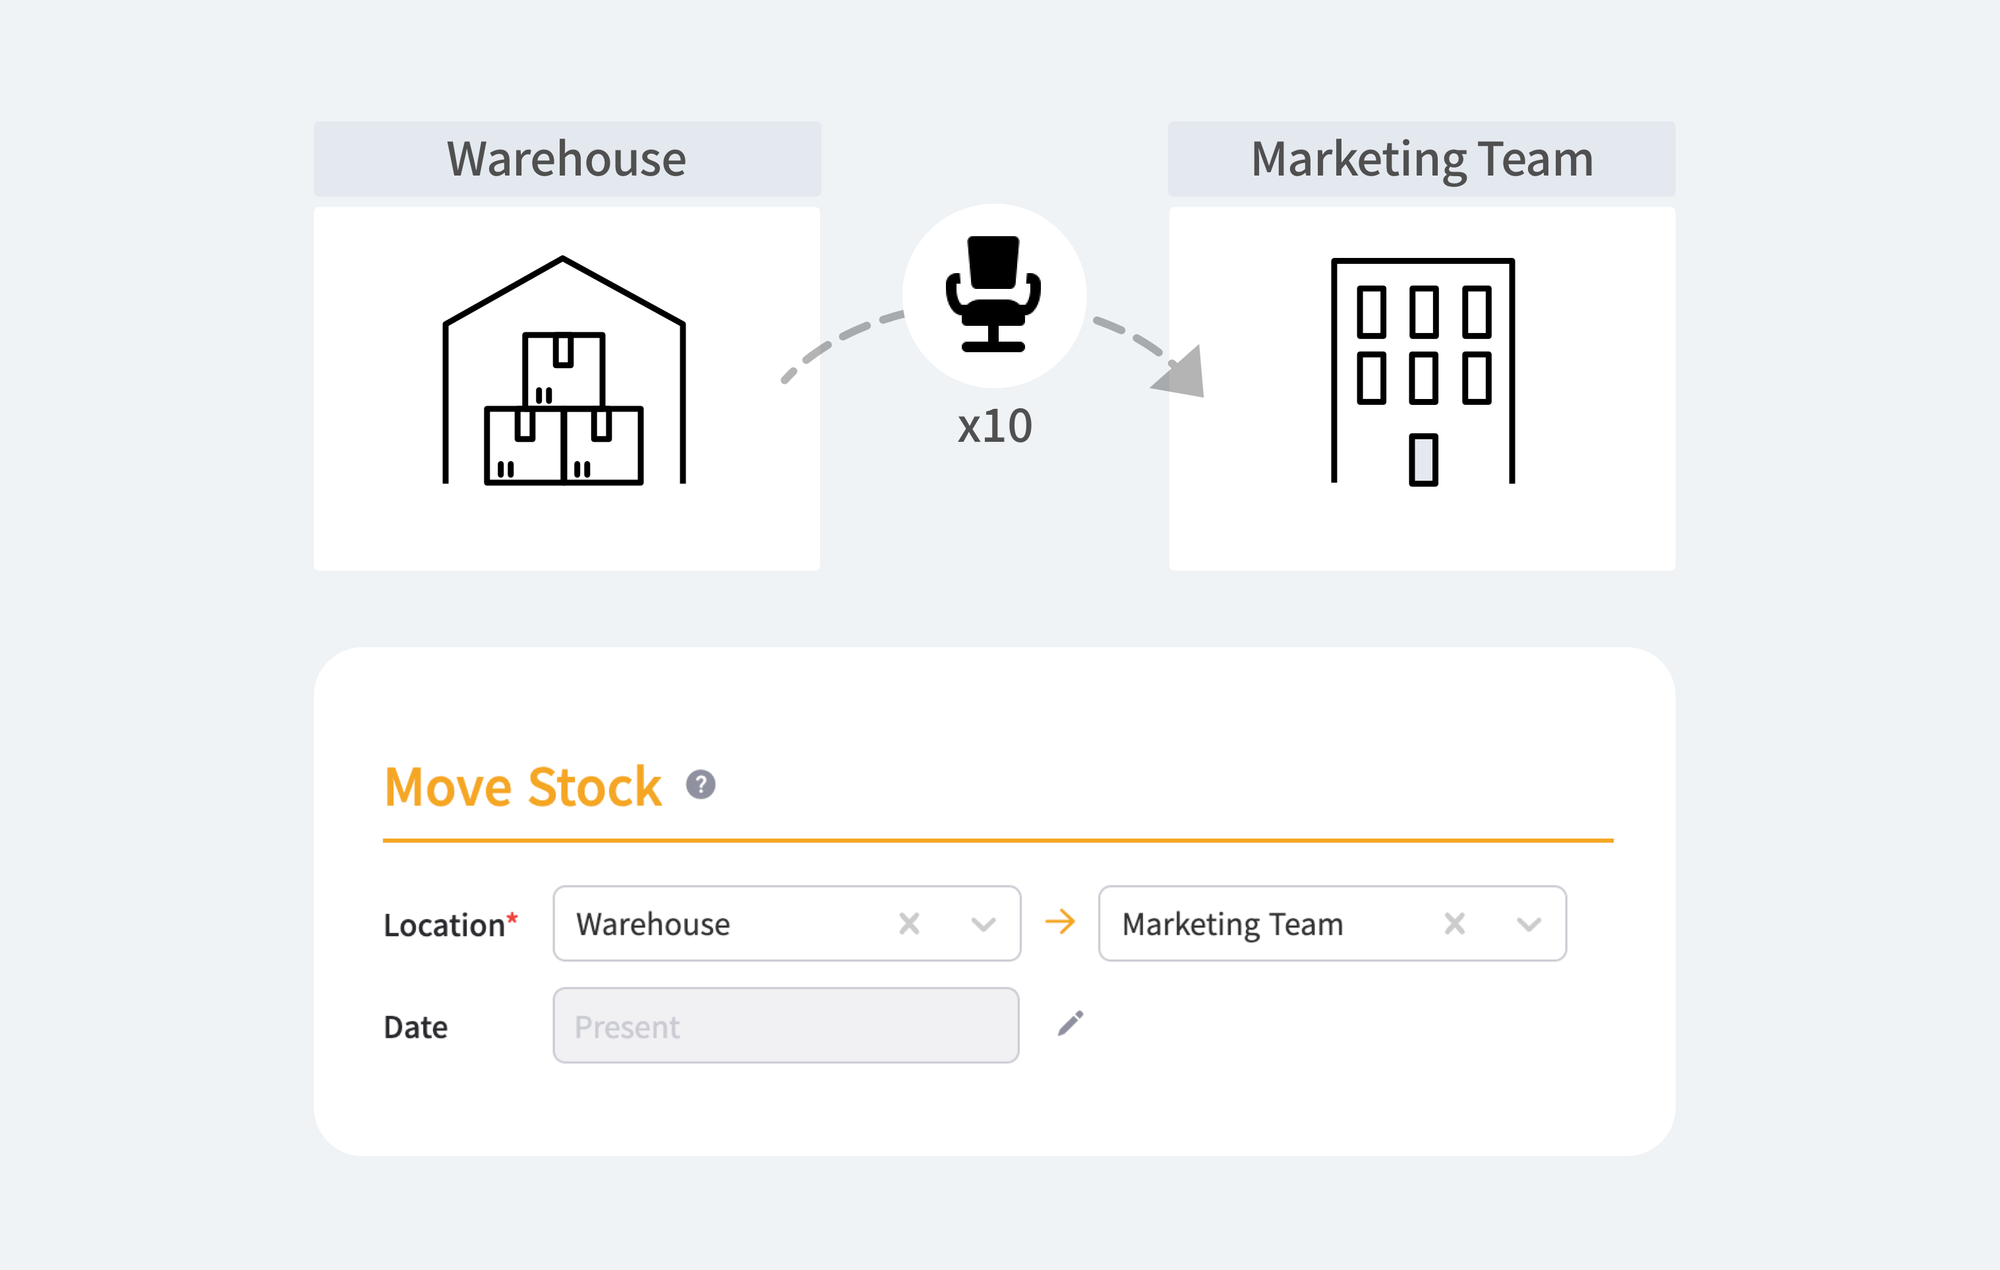 An infographic showing how to move 10 chairs from the warehouse to the marketing team location